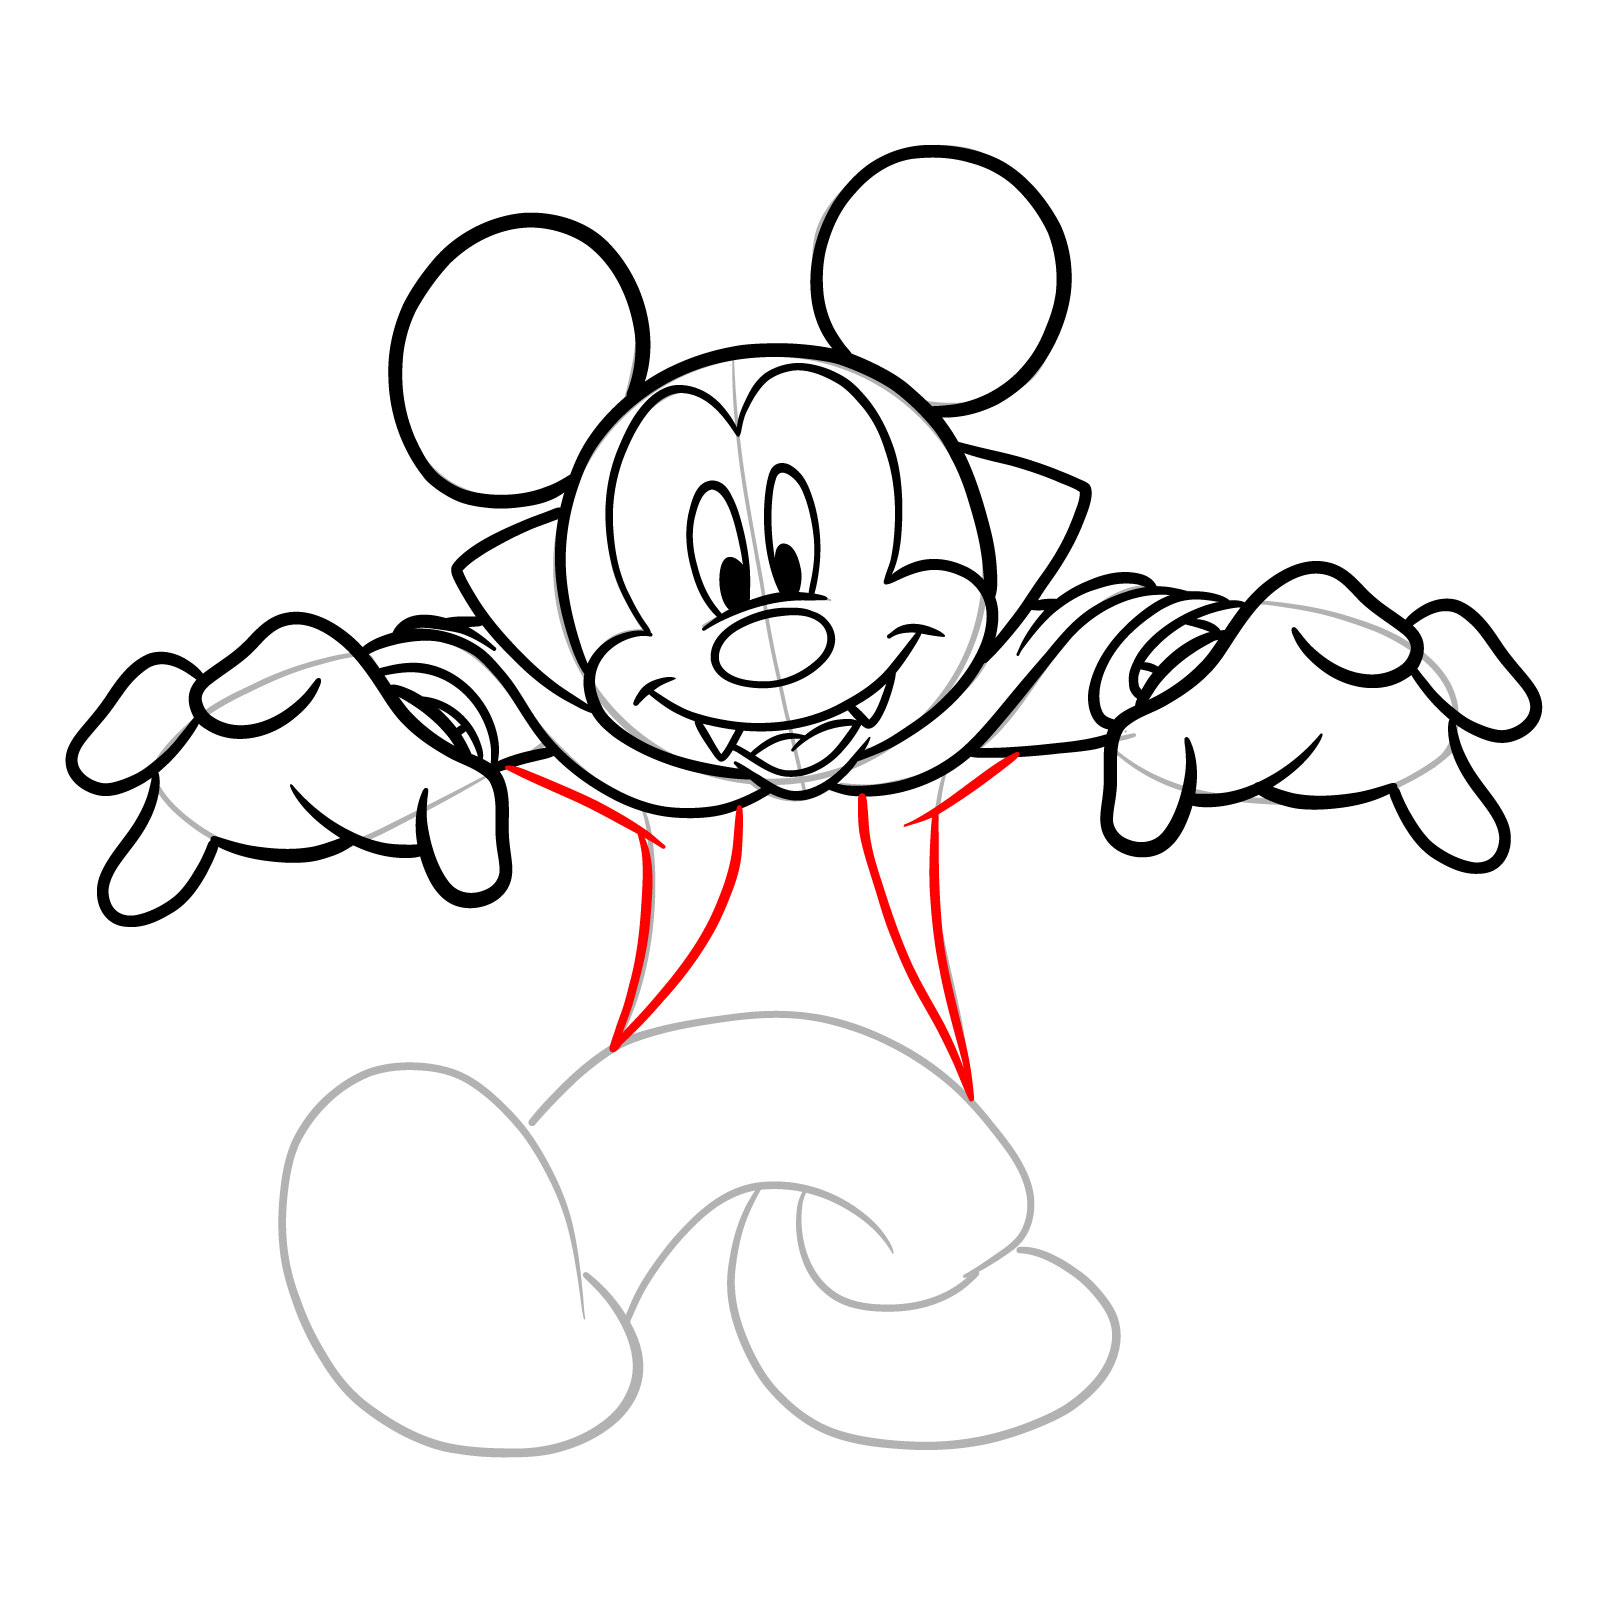 How to draw Dracula Mickey Mouse - step 19